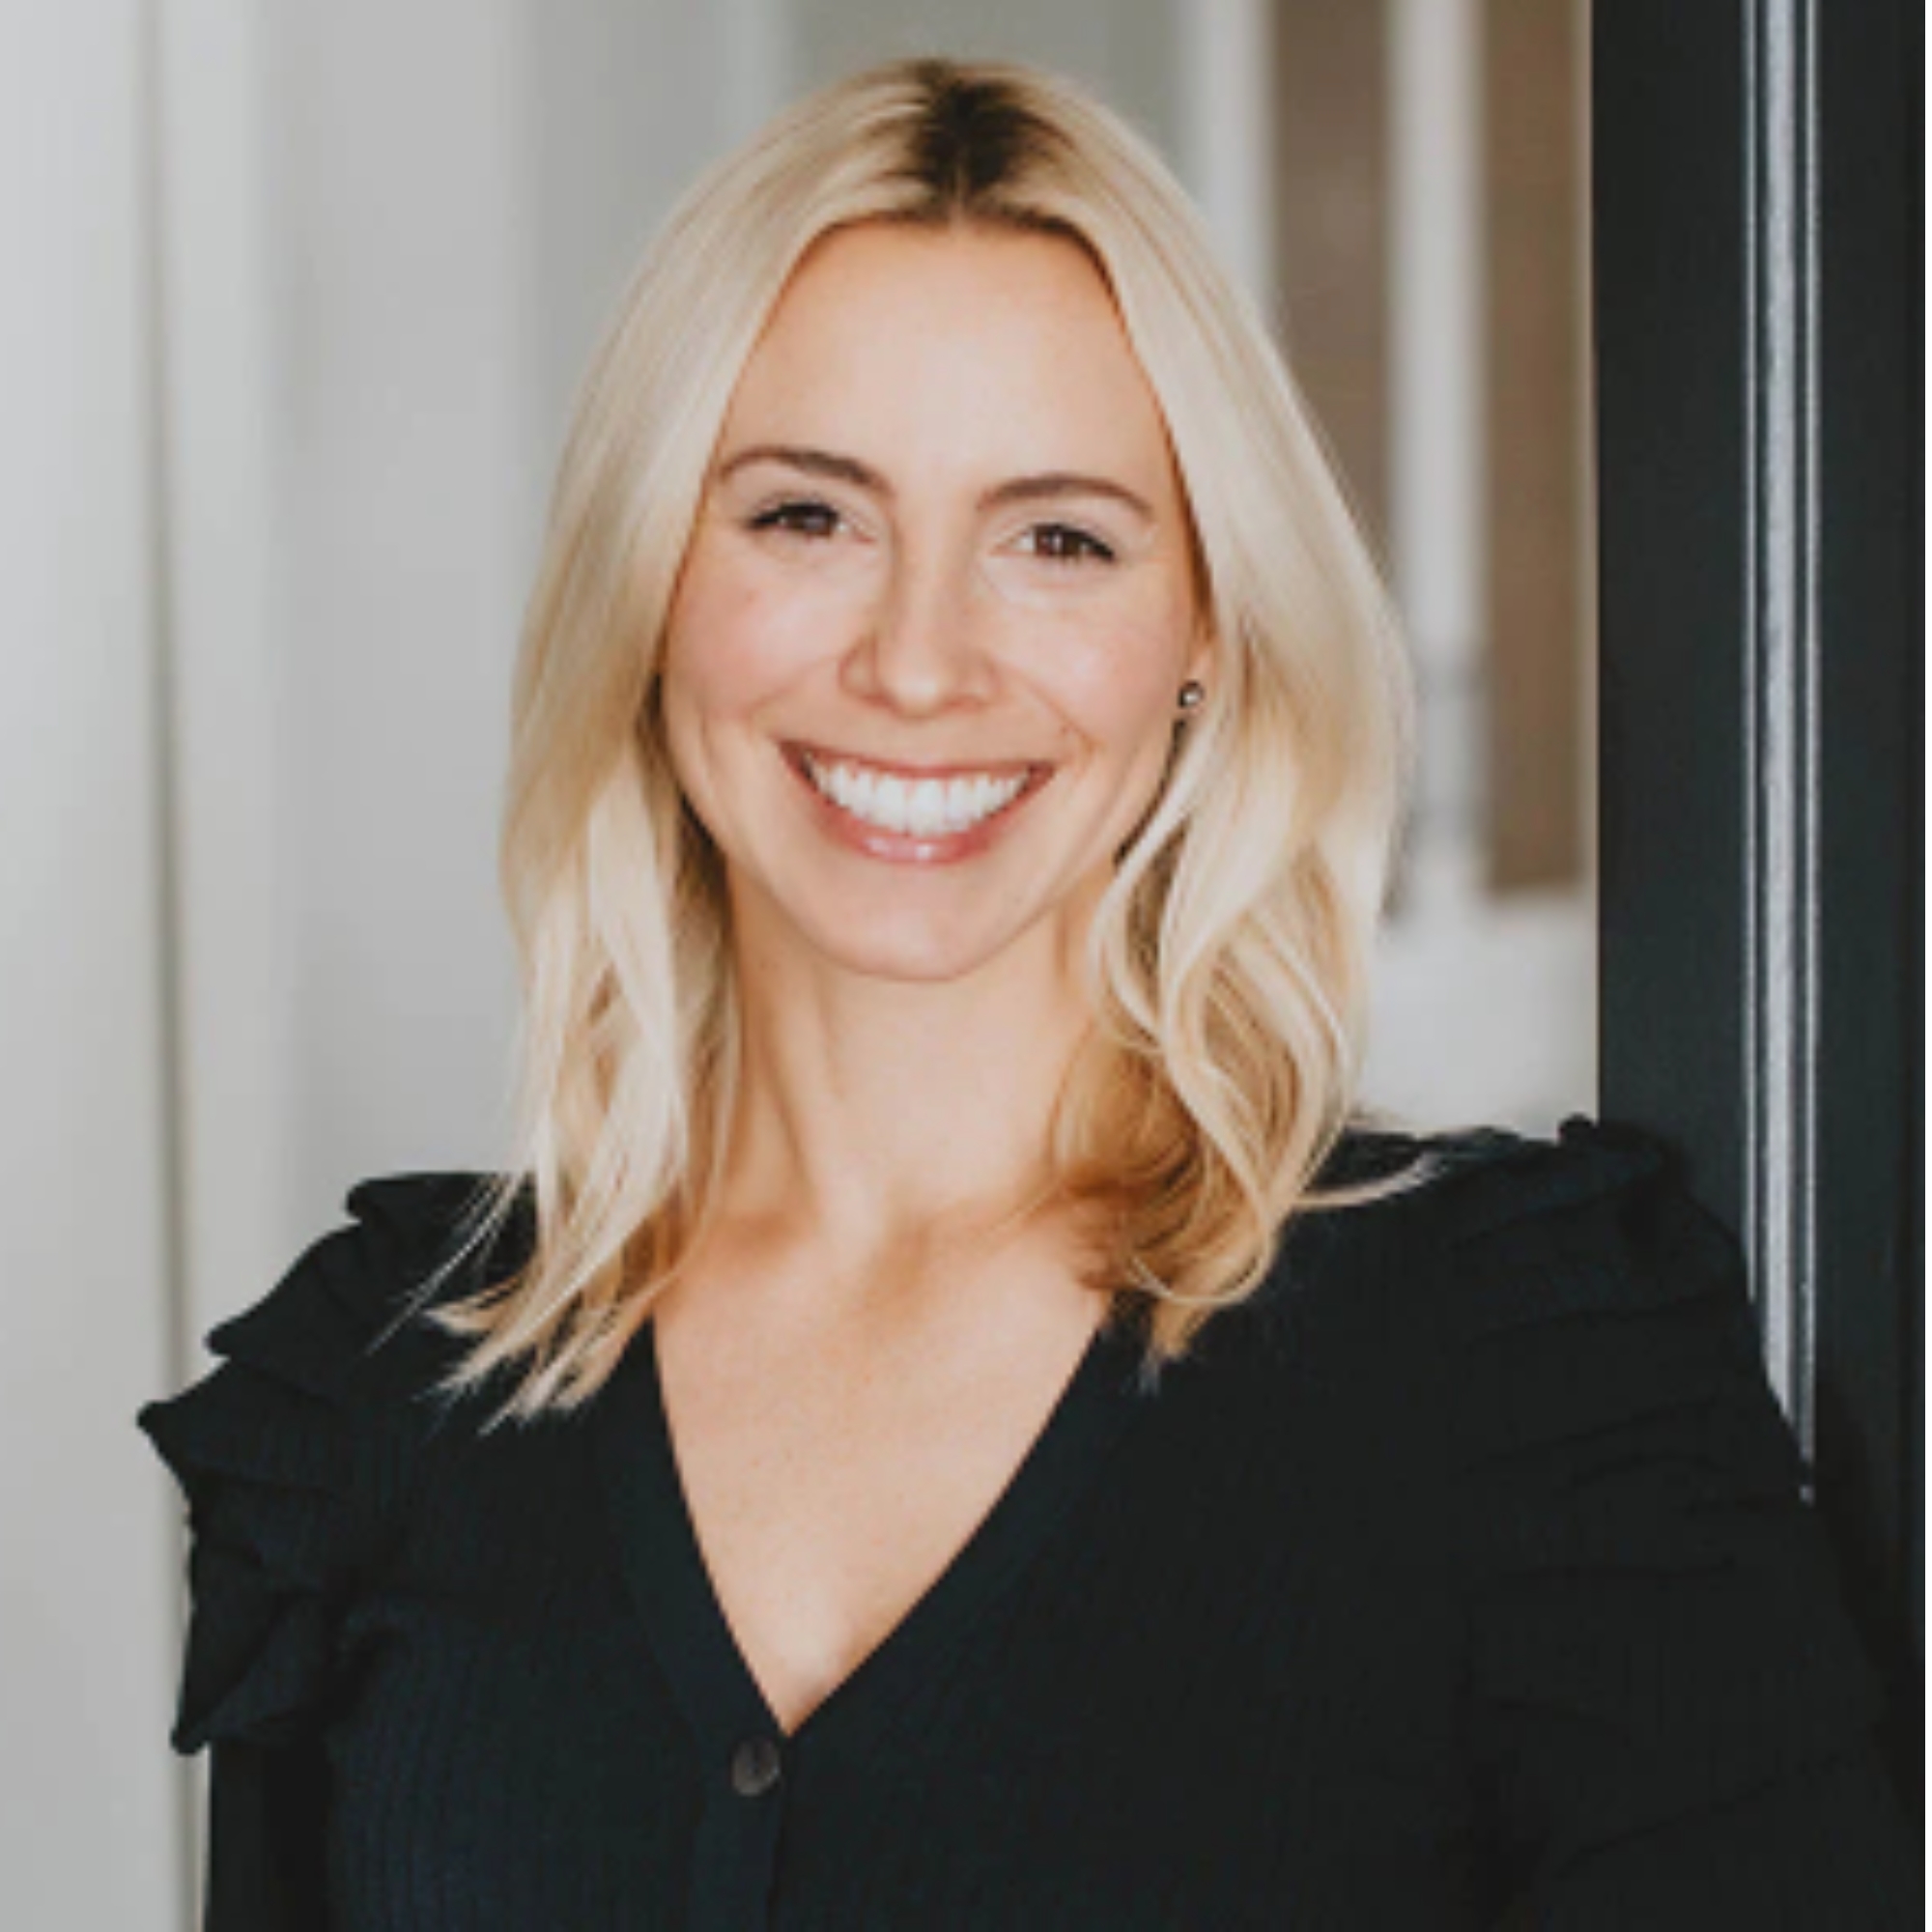 Ashley Murphy, Professional organizer, co-founder and CEO of Neat Method